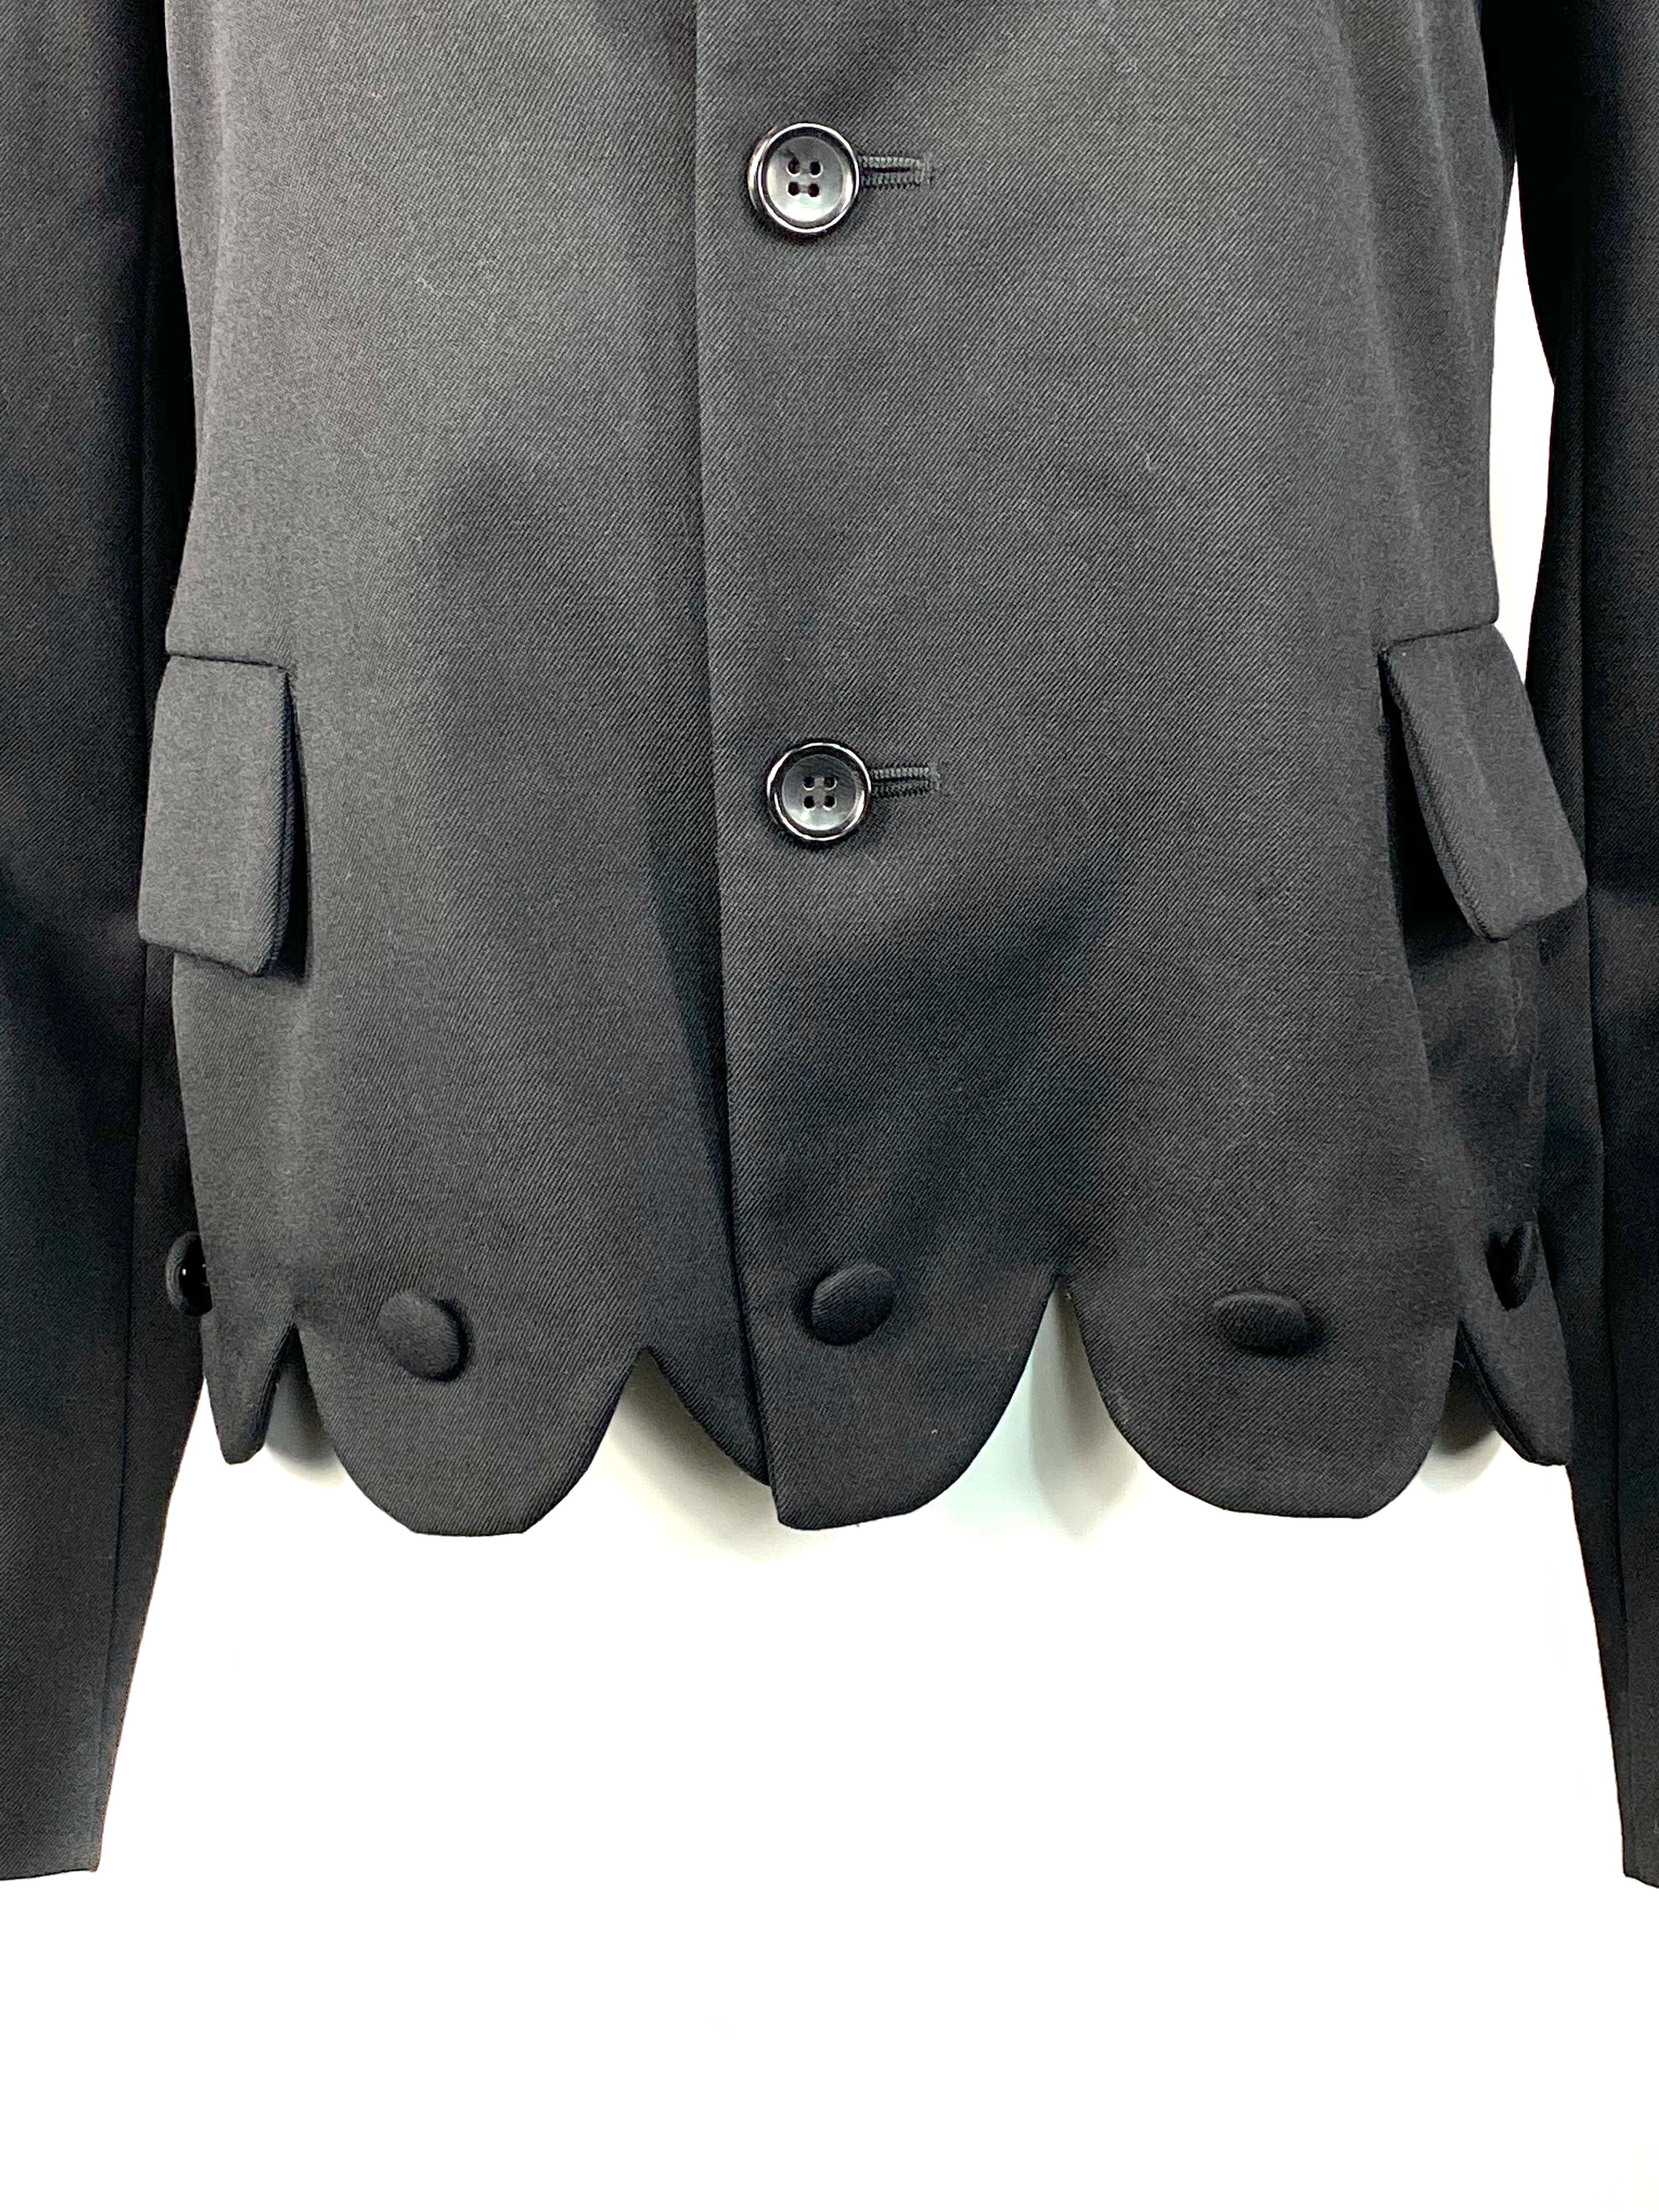 Comme des Garcons GIRL Black Wool Blazer Jacker w/ Buttons Size S For ...